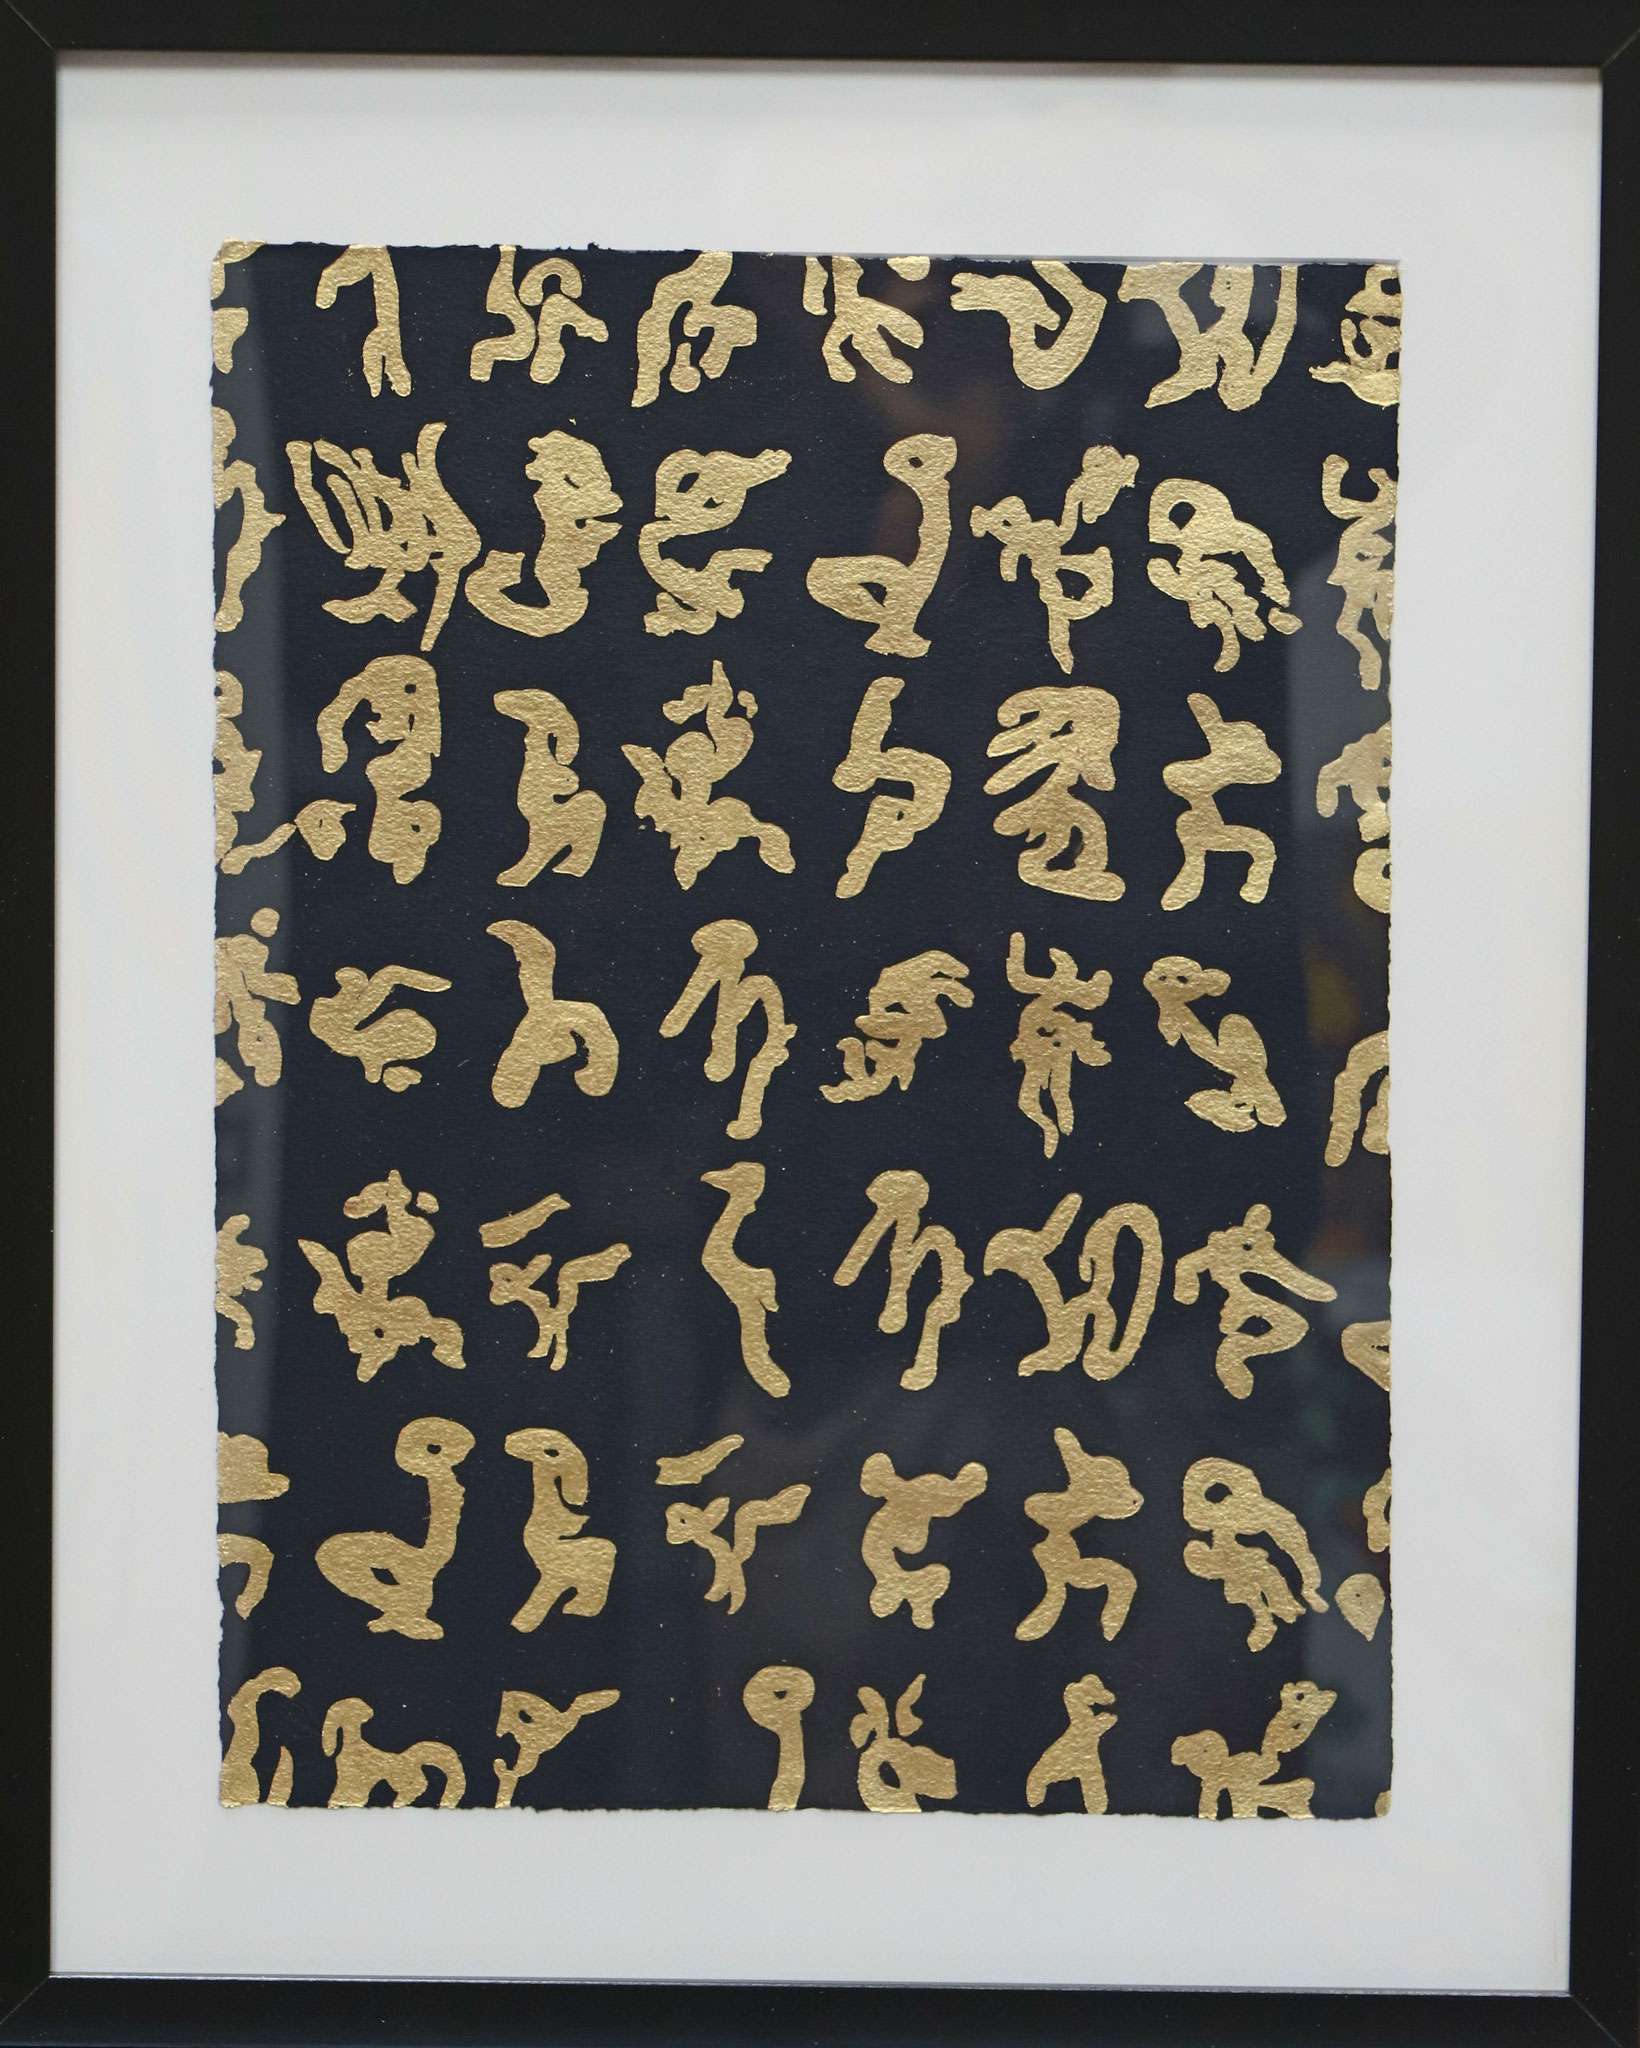 "Hiero Kalligraphy 4" Oktober 2021. 23,75 carat gold leaf on paper prepared with black board paint. 30 x 40 cm-